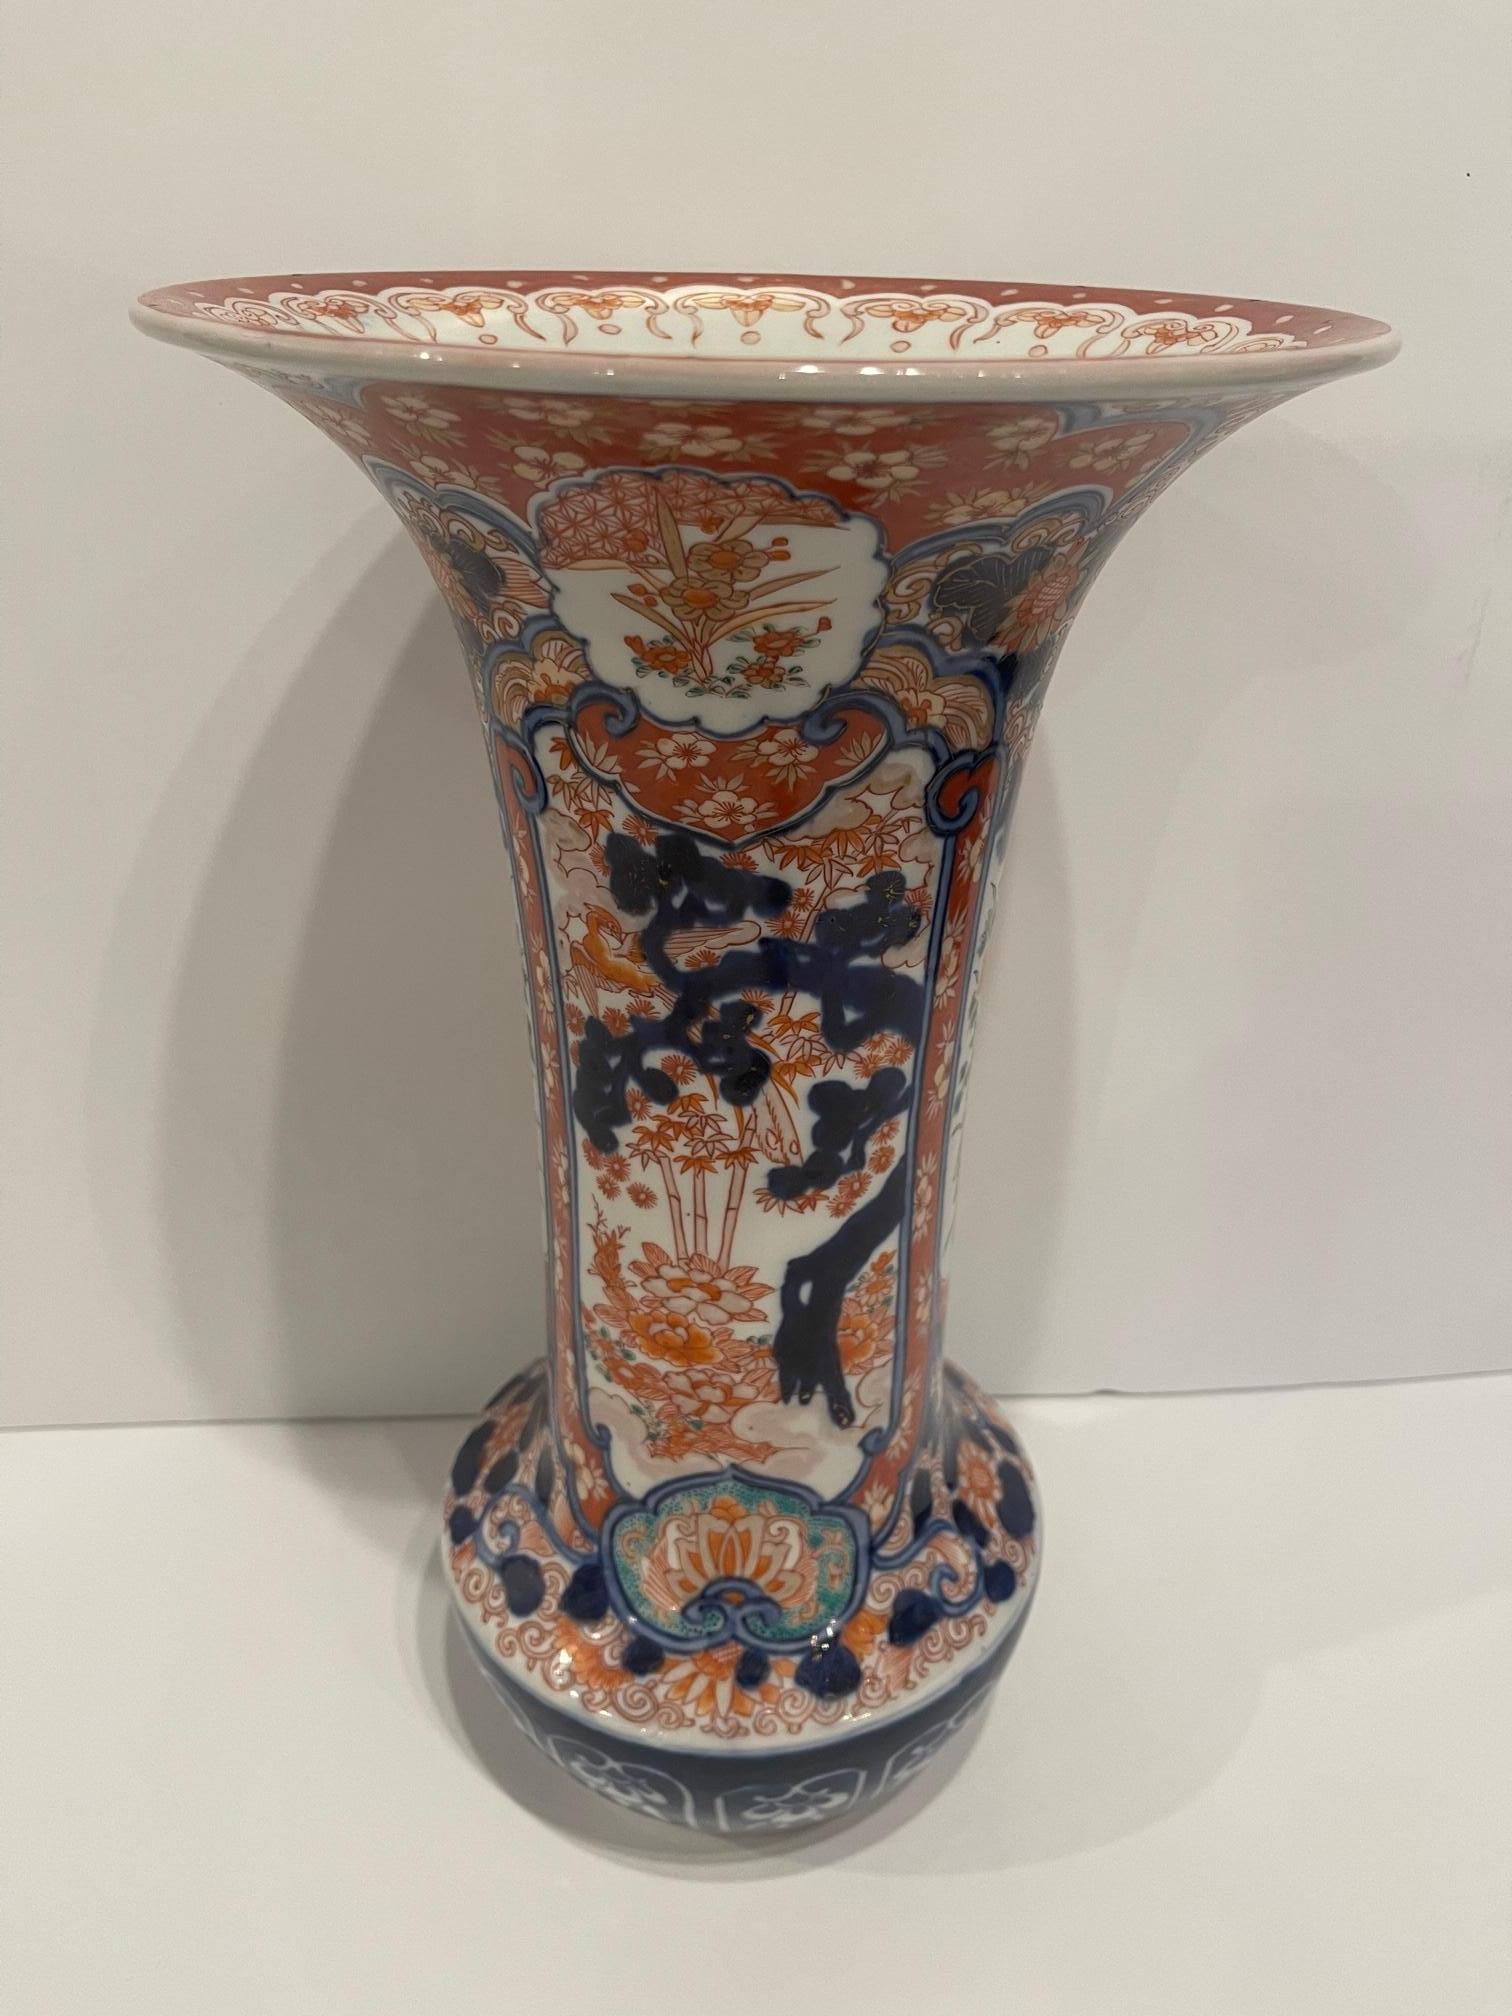 Fluted Japanese Imari Vase, 19th Century.  Wood stand included.  Base is 4